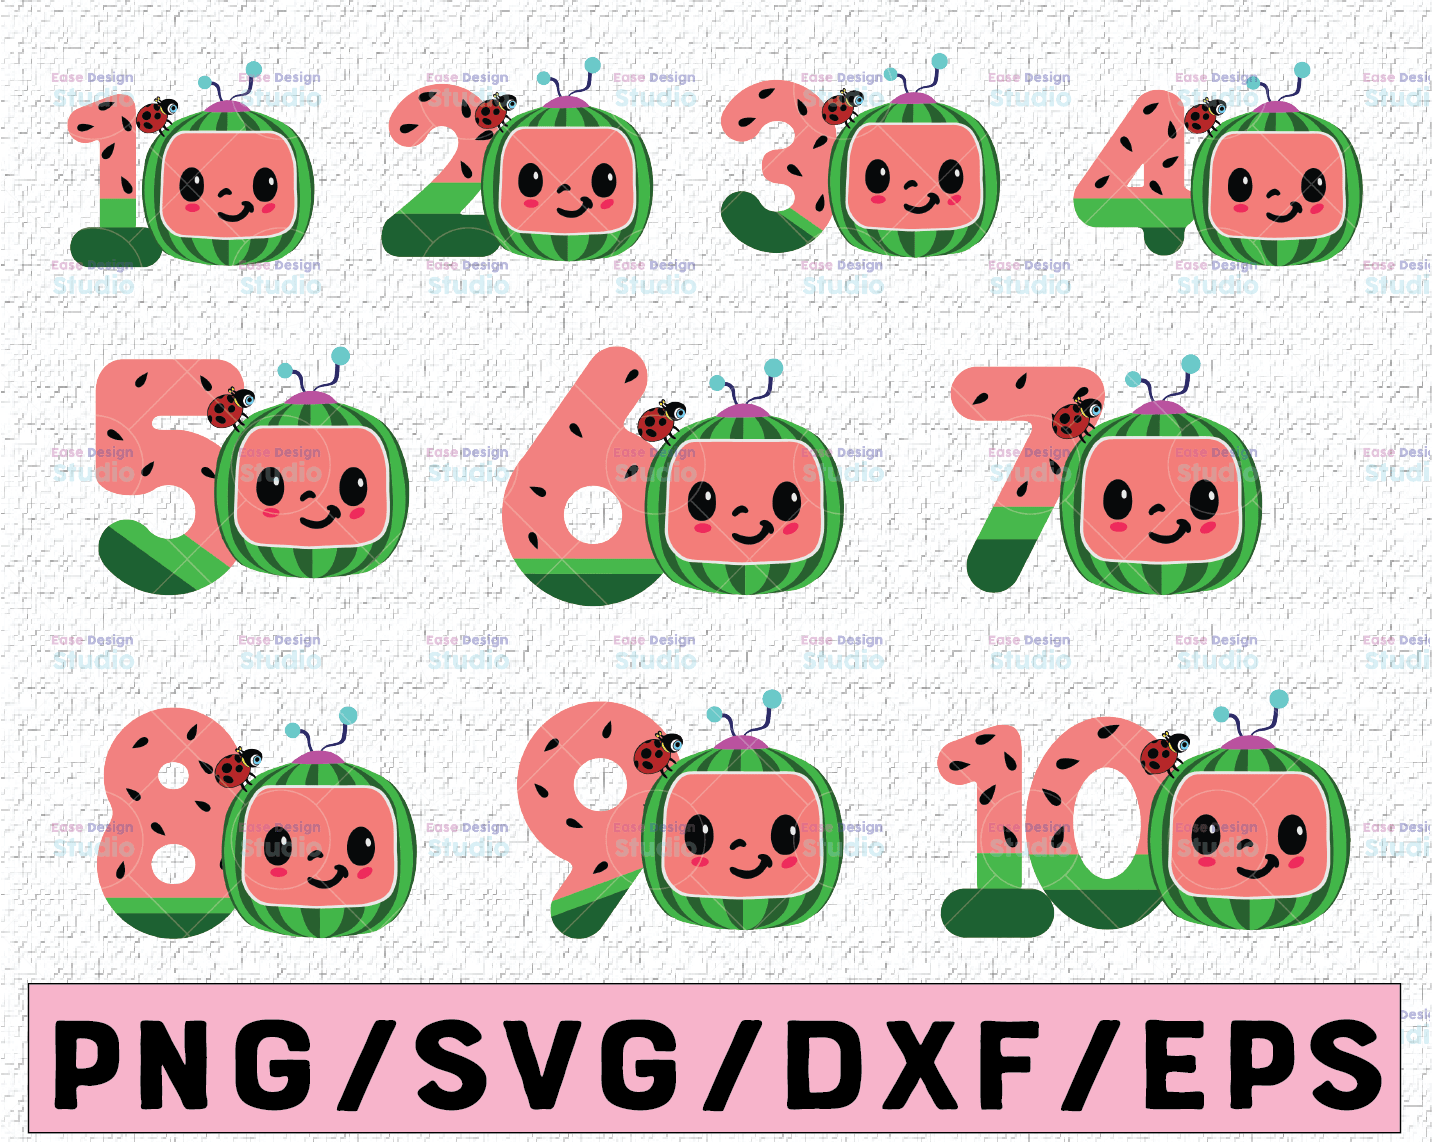 Download Cocomelon Logo And Birthday Number Svg Png Cocomelon Birthday Svg Png Cocomelon Family Birthday Png Watermelon Svg Png Eps Jpg Dxf Vectorency